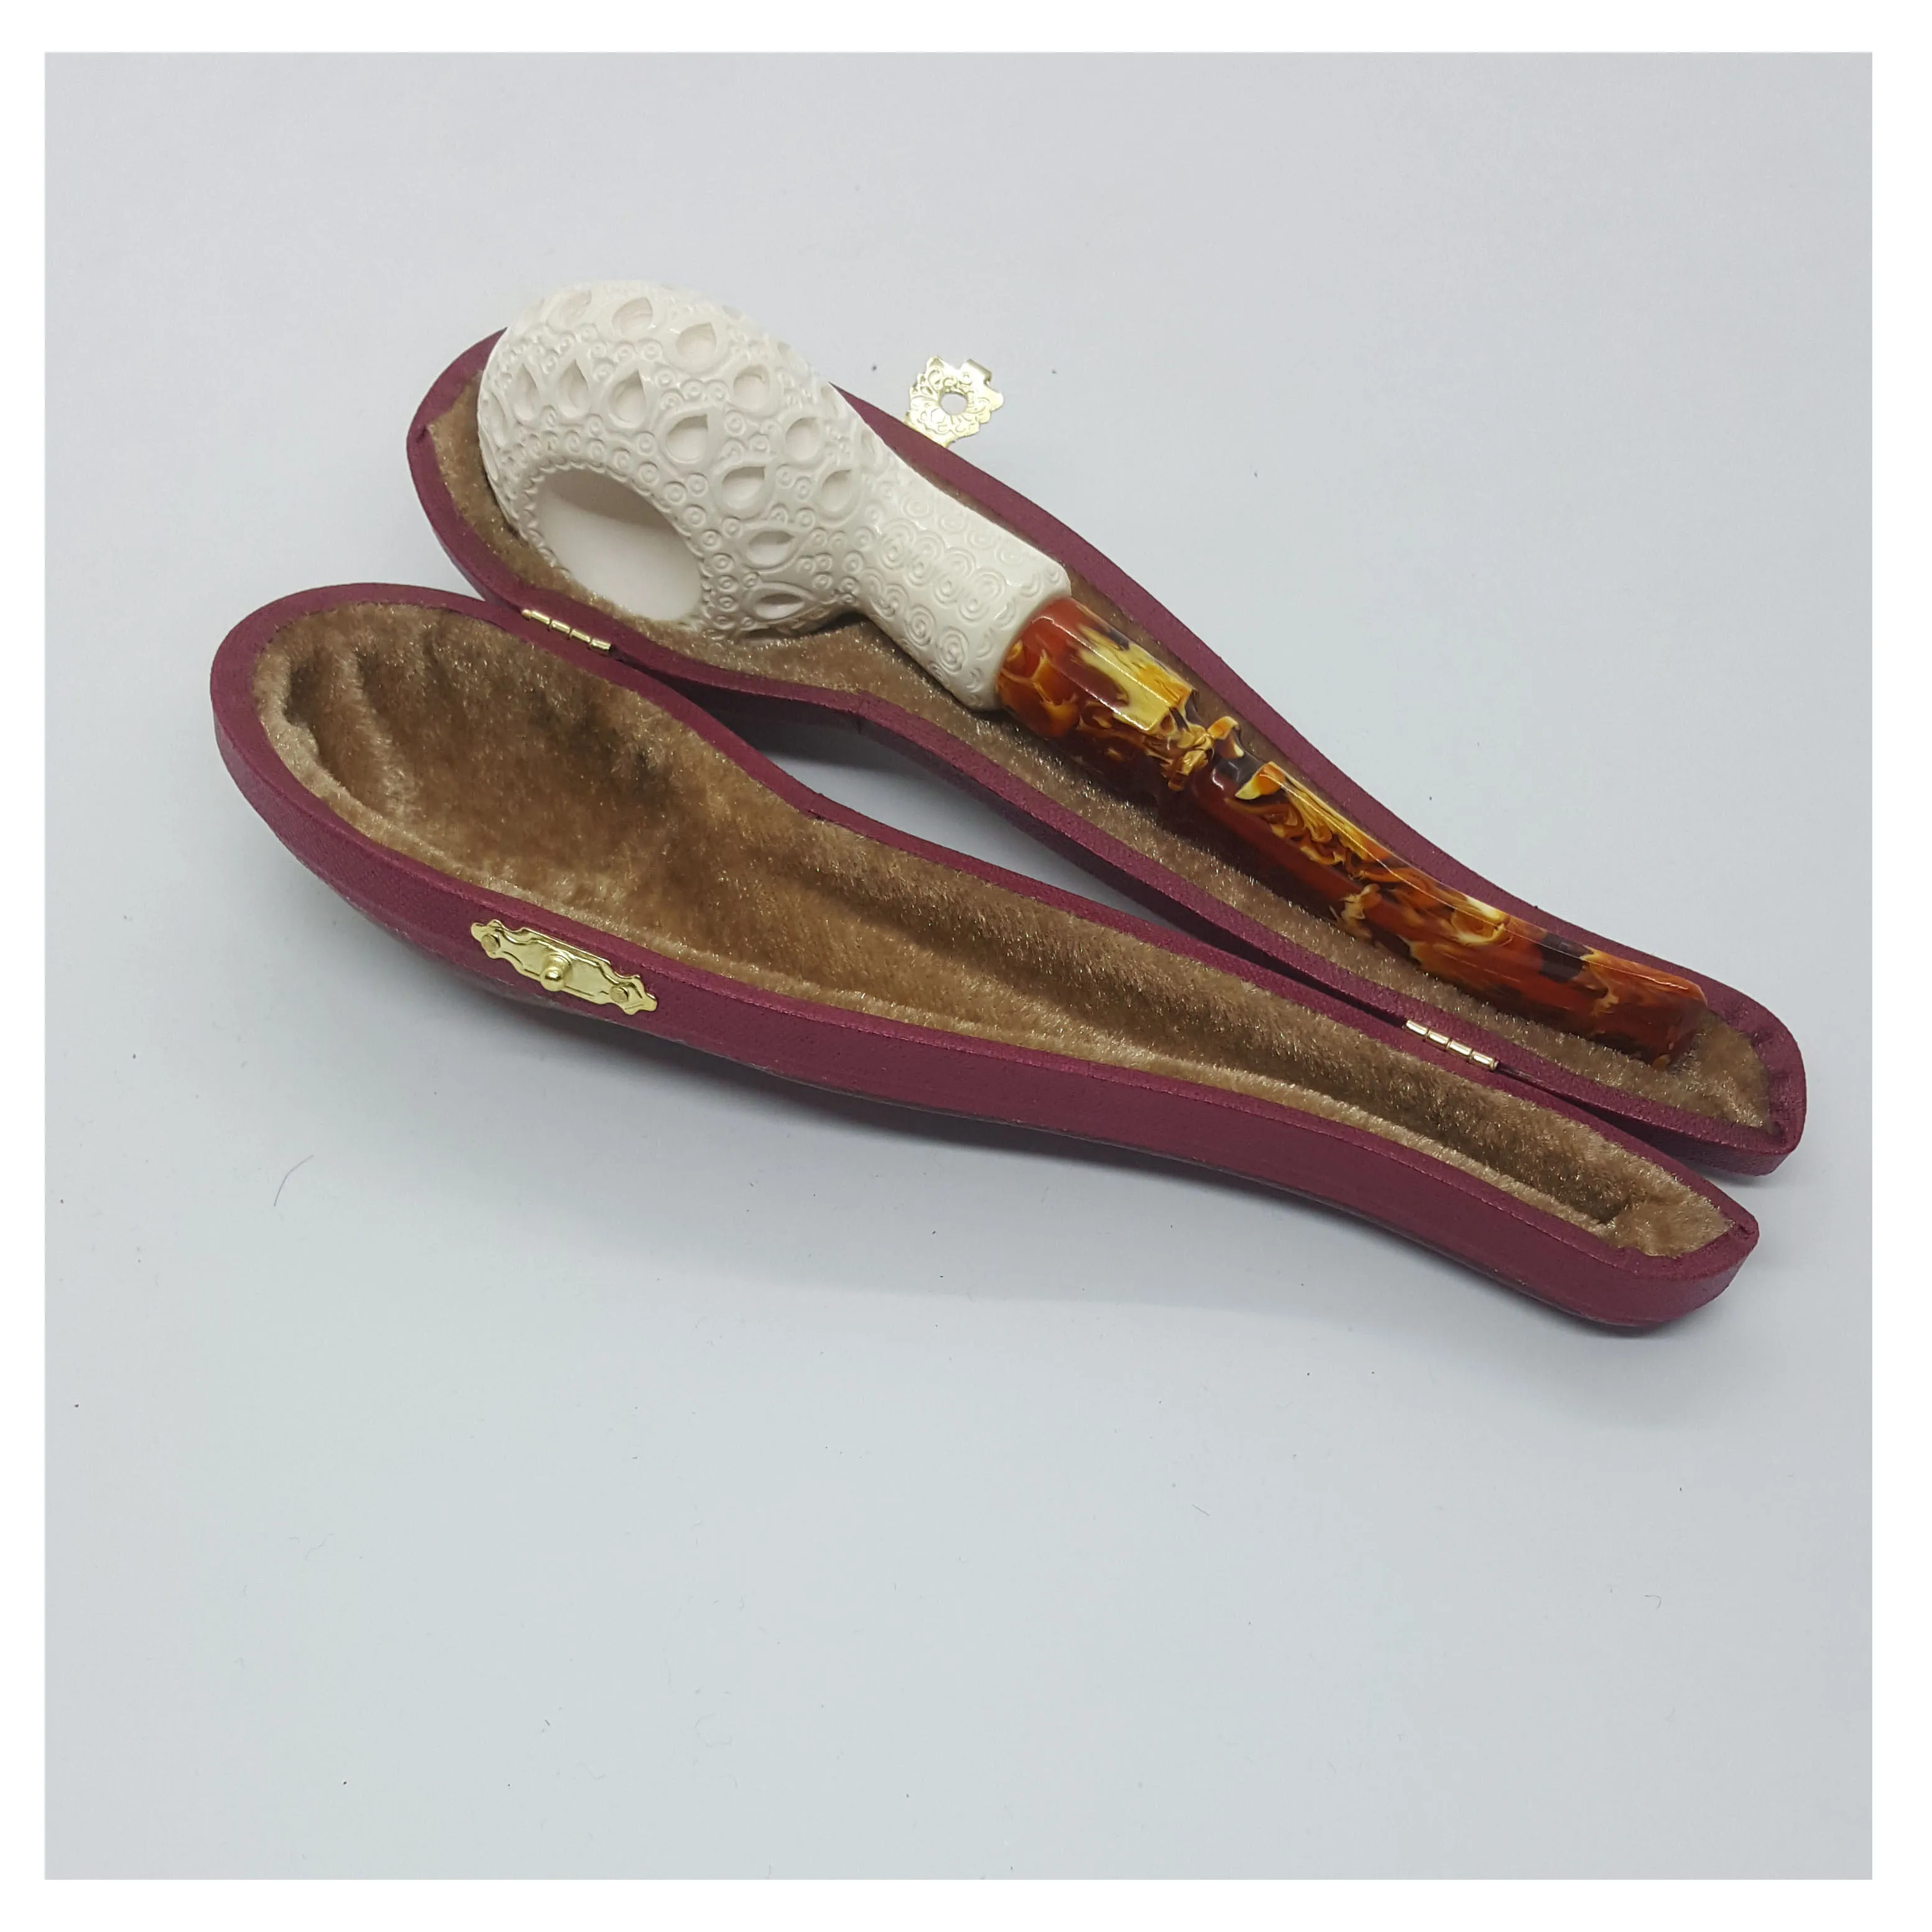 

Handmade Natural-Meerschaum Long Pipes-Smoking-Tobacco-Pouch Holder-Smoke Mouthpiece-High Quality Material-Pipe Filters-Gift